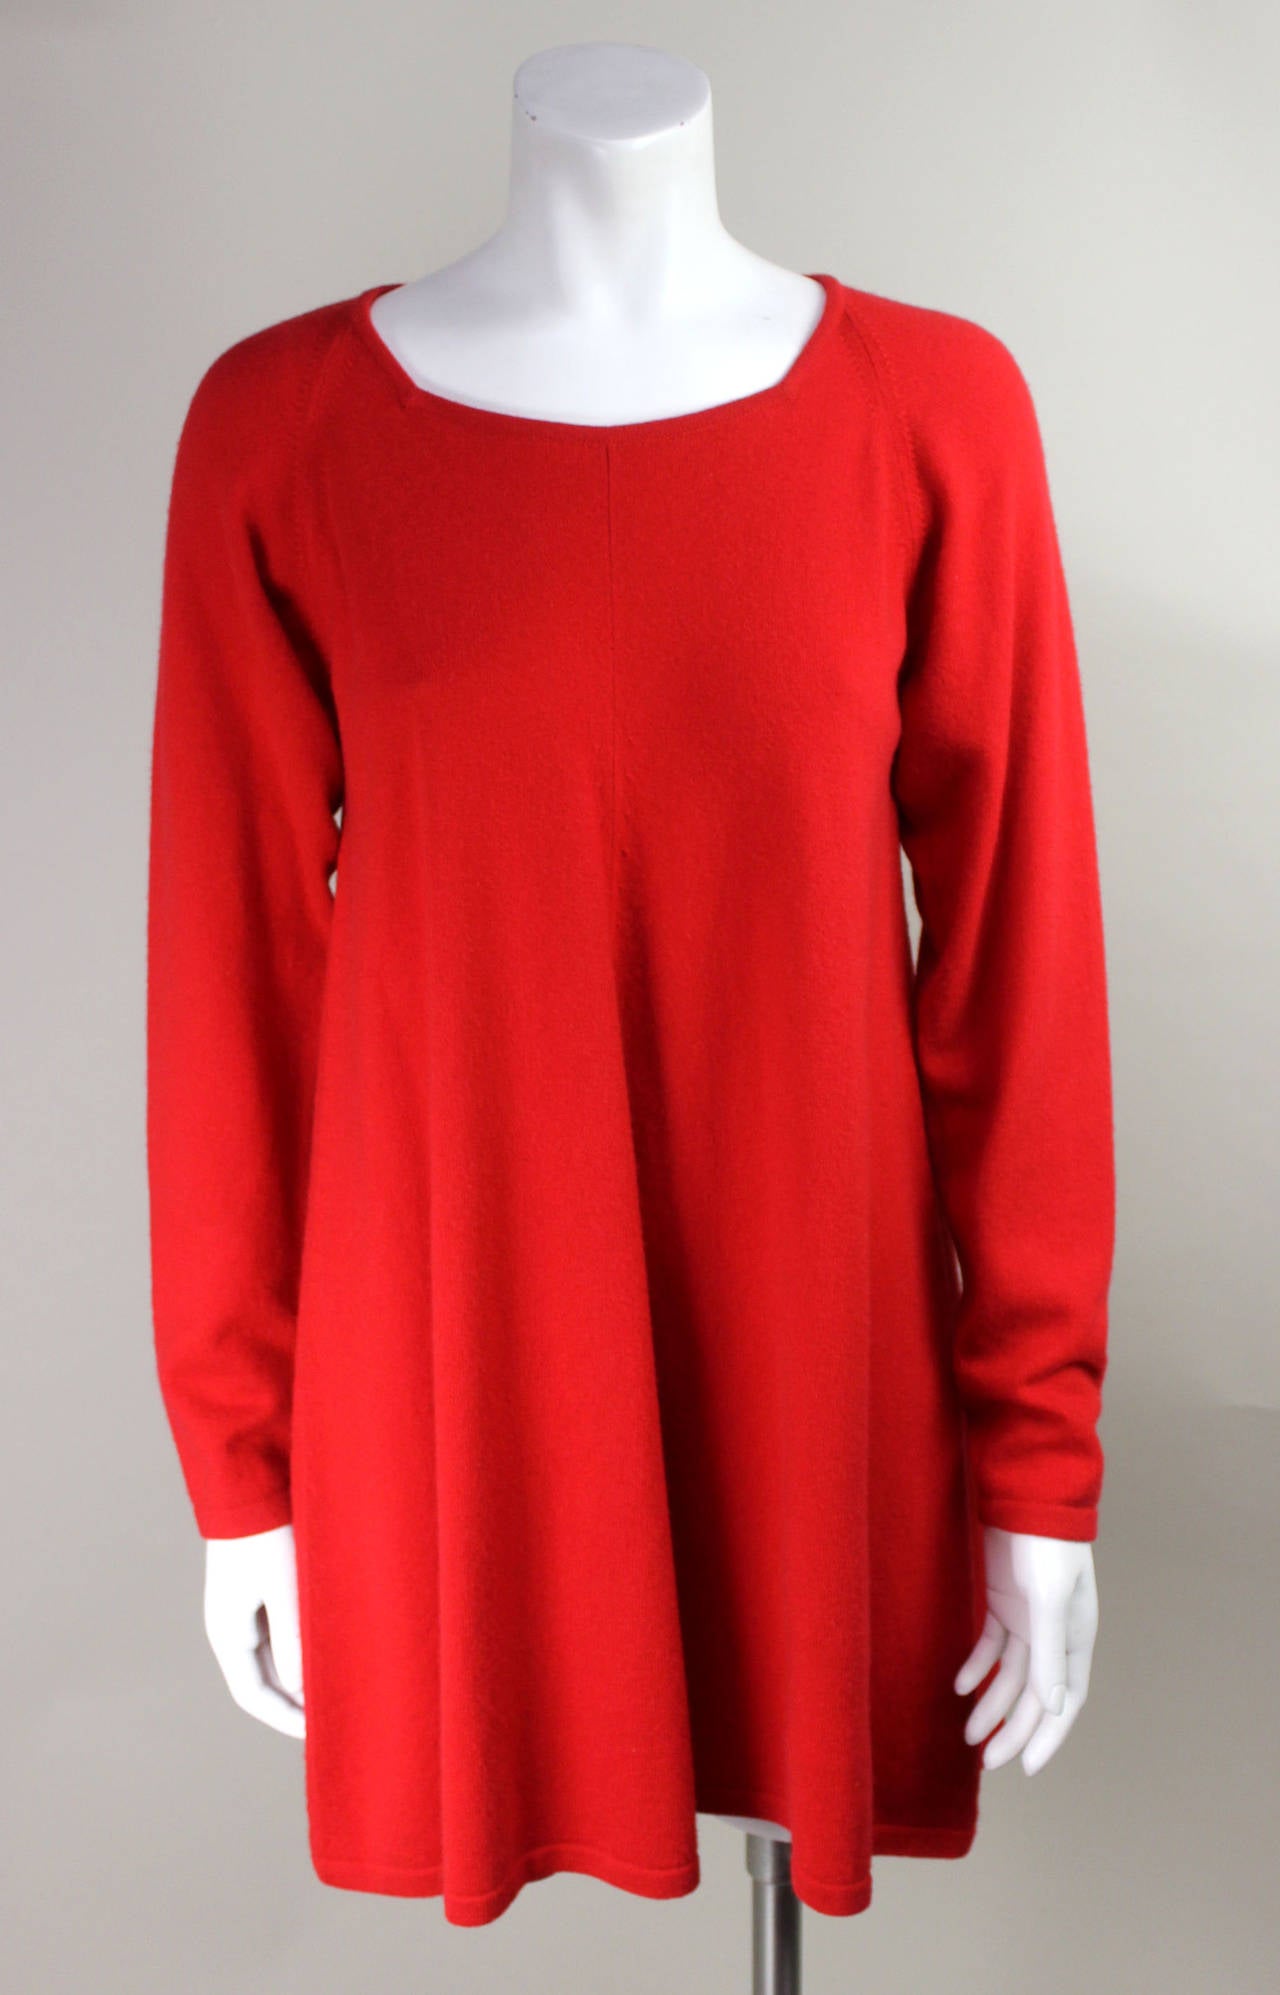 Jean Muir liked working with soft flowing fabrics. Her approach to fashion was comfort and timelessness. This dress is a perfect exampe, it could be 60s, 90s, or current. It is of the softest Scottish cashmere and in a very appealing shade of red.